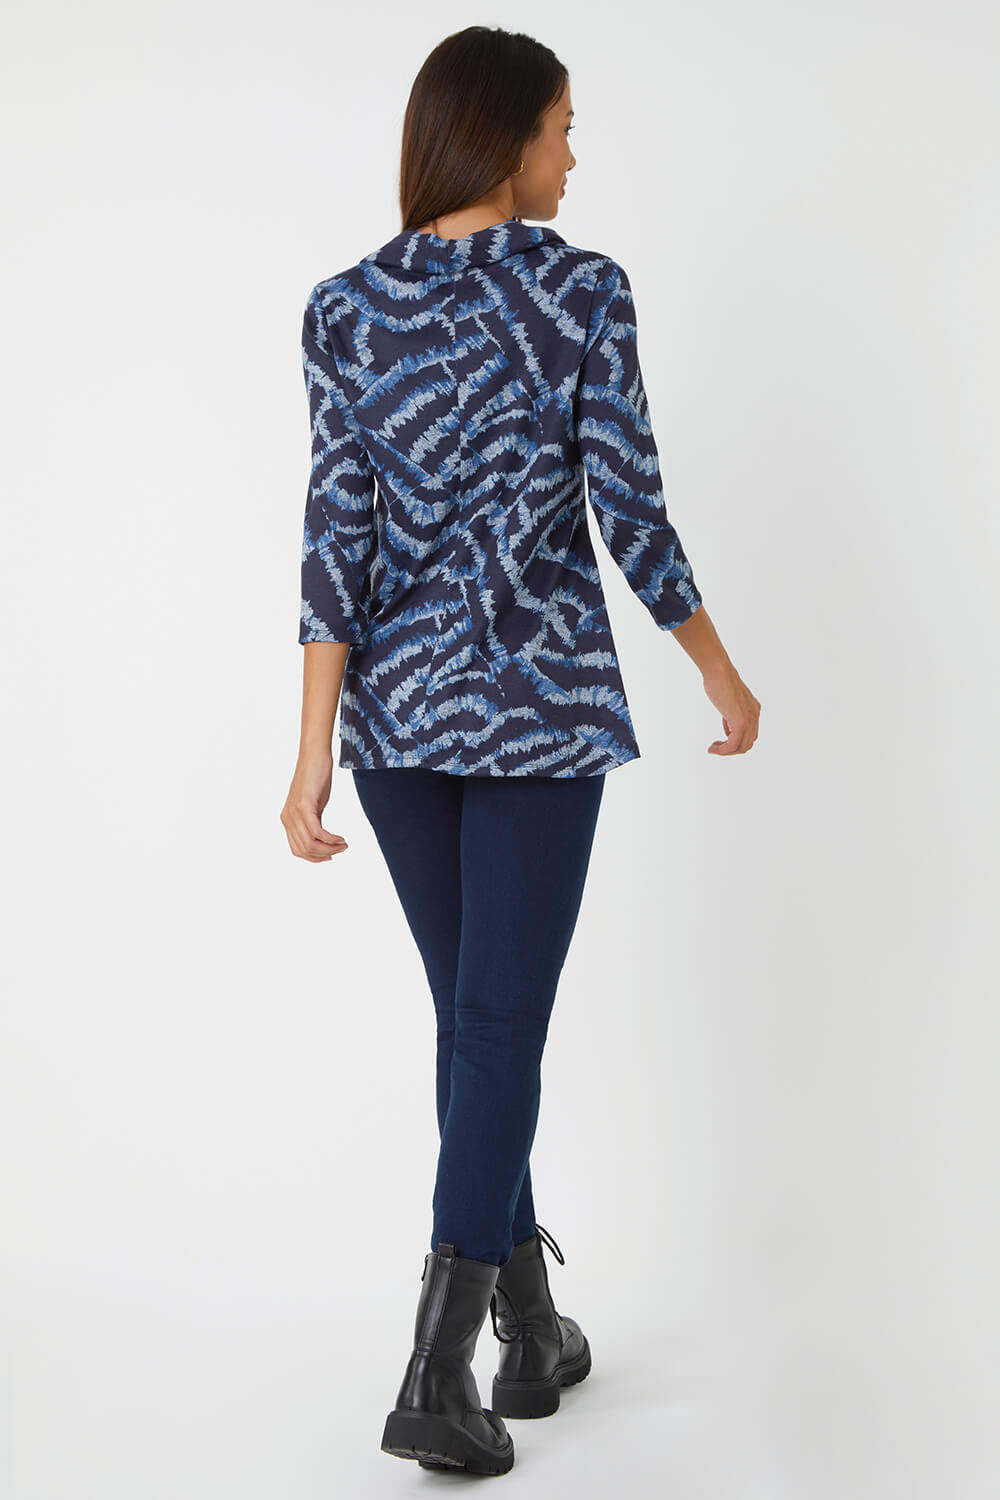 Blue Abstract Print Cowl Neck Stretch Top, Image 3 of 5